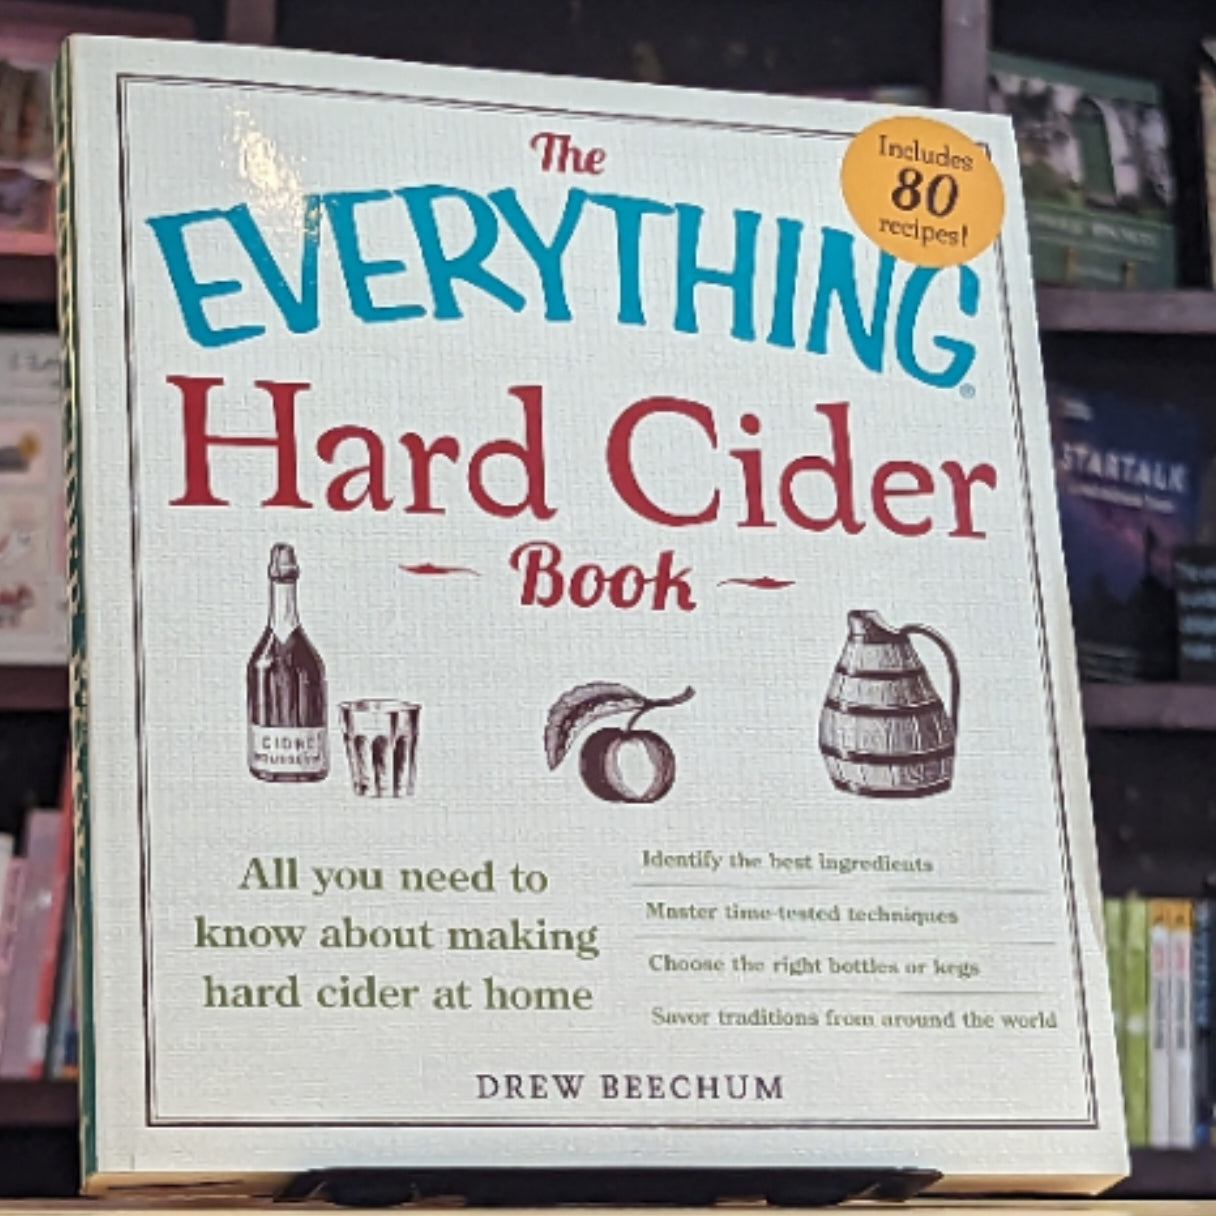 The Everything Hard Cider Book: All you need to know about making hard cider at home